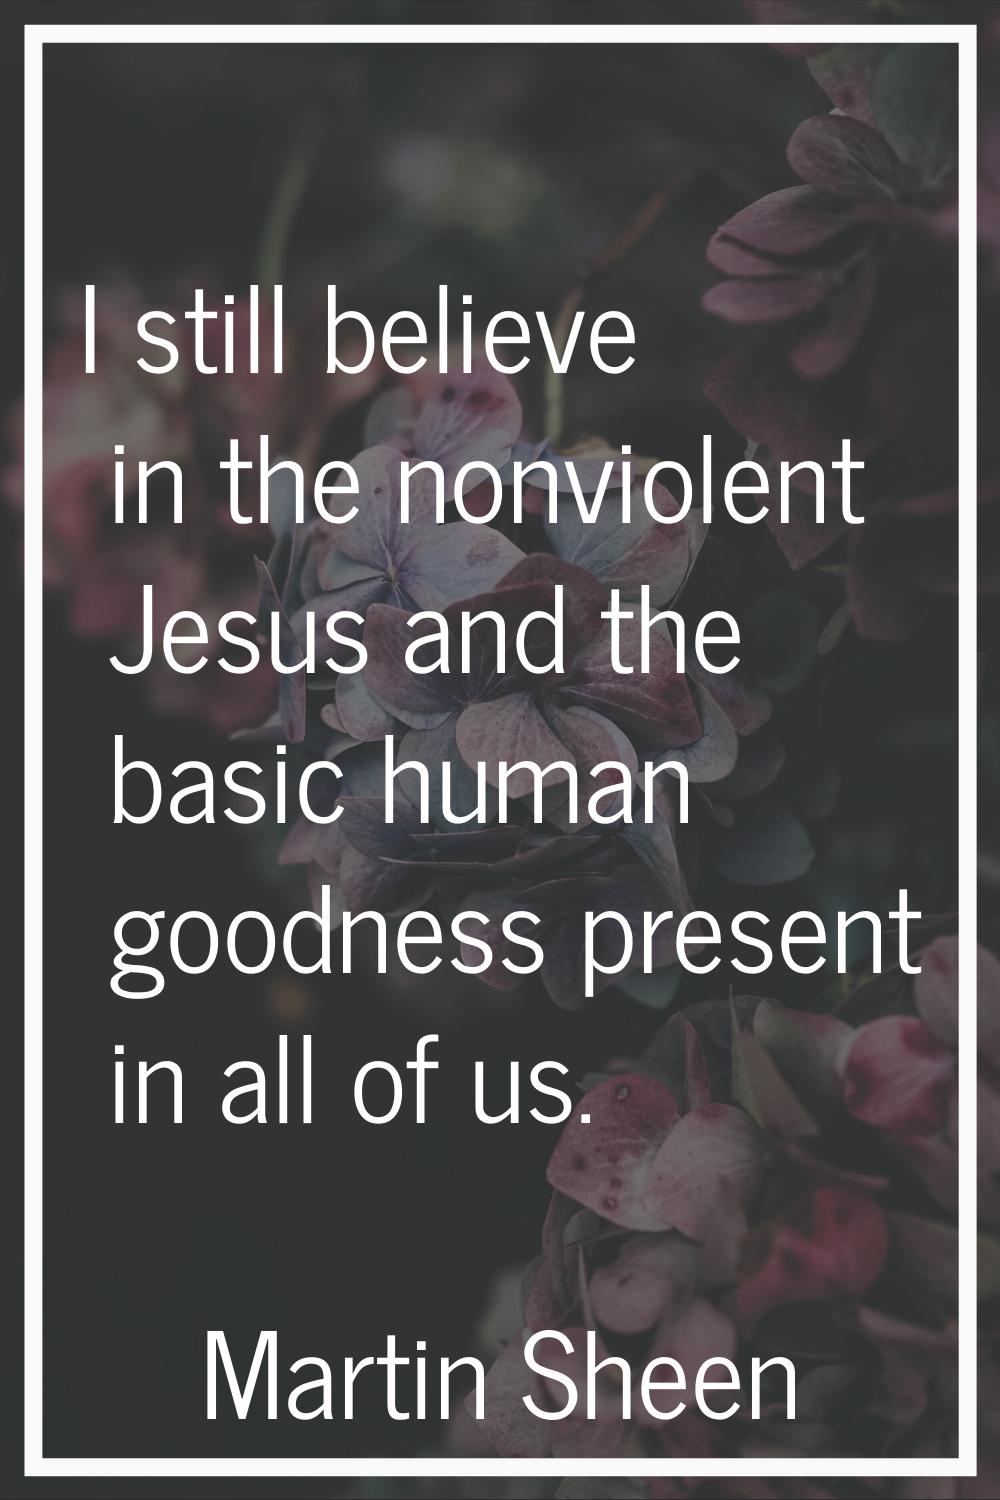 I still believe in the nonviolent Jesus and the basic human goodness present in all of us.